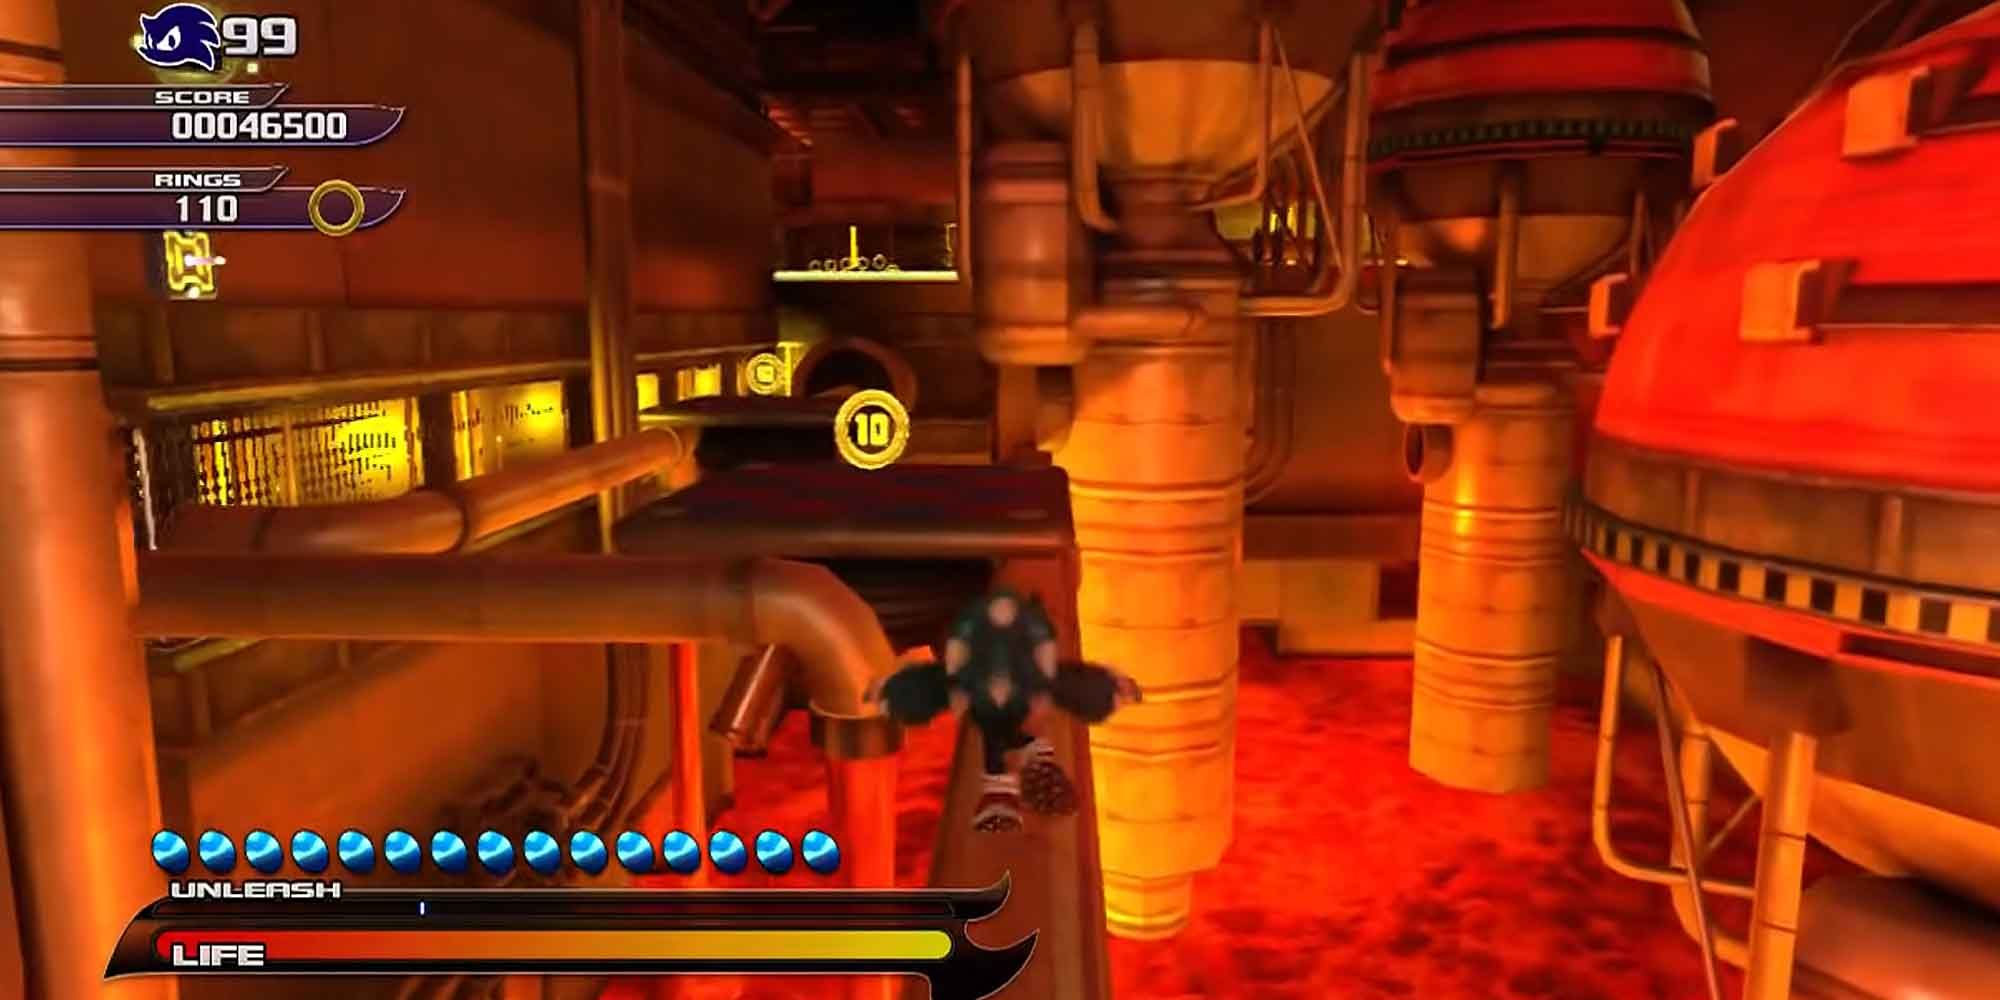 The Eggmanland level in Sonic Unleashed